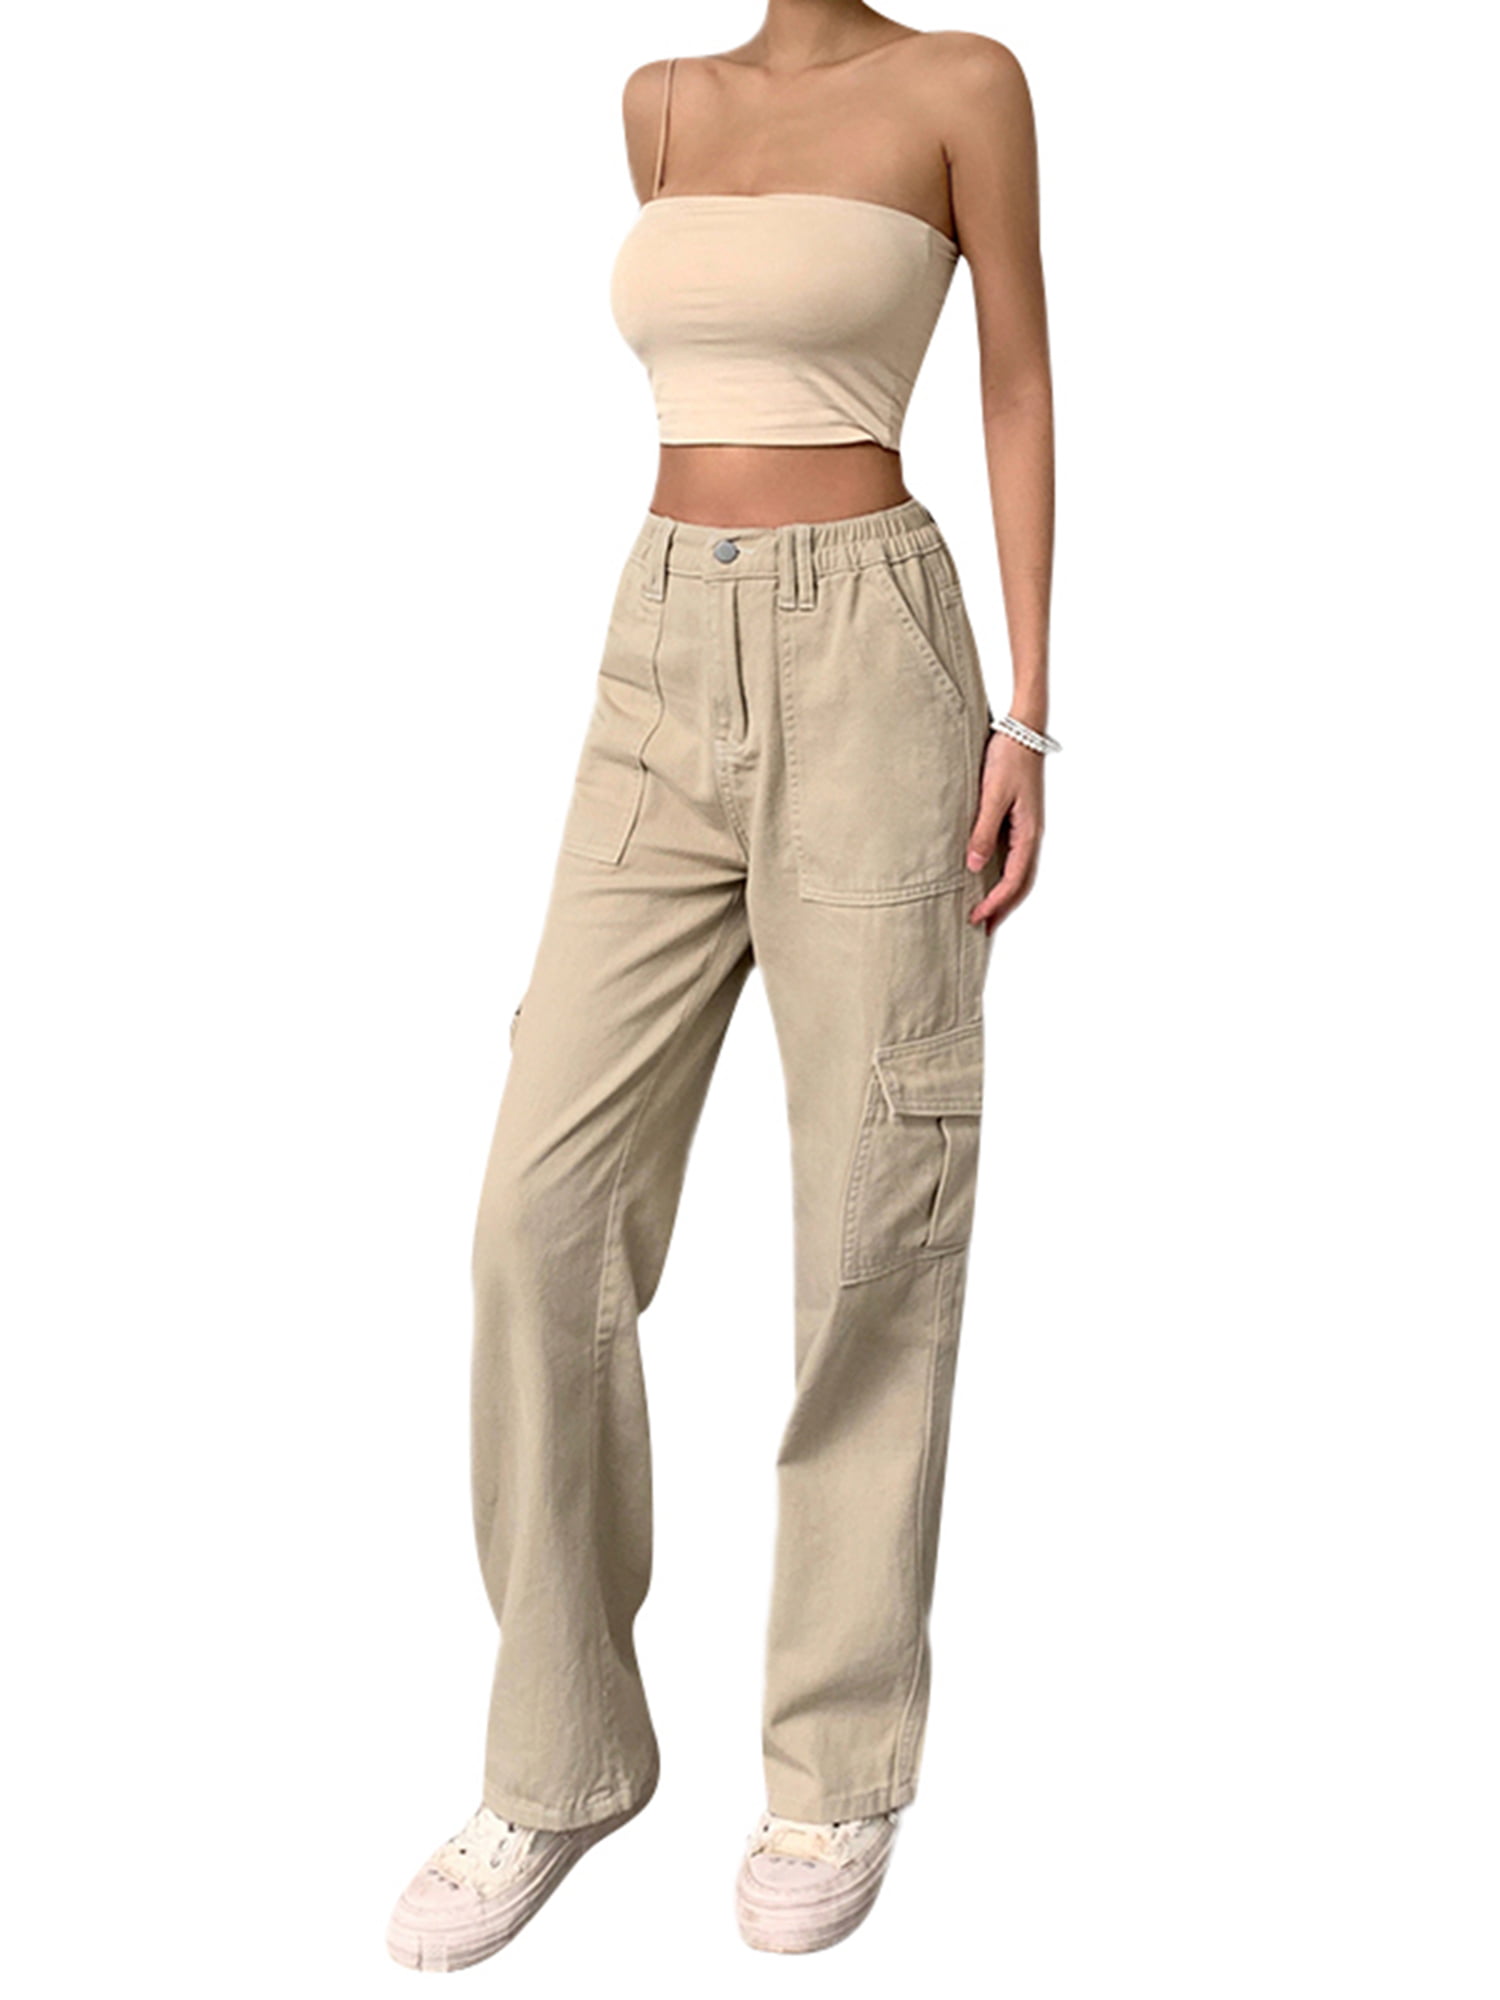 Summer Pants Women High Waist Sexy Straight Cargo Pants Fashion 2021 Female  Trousers Office Clothes Vintage Elegant Khakis X0629 From Cow01, $14.6